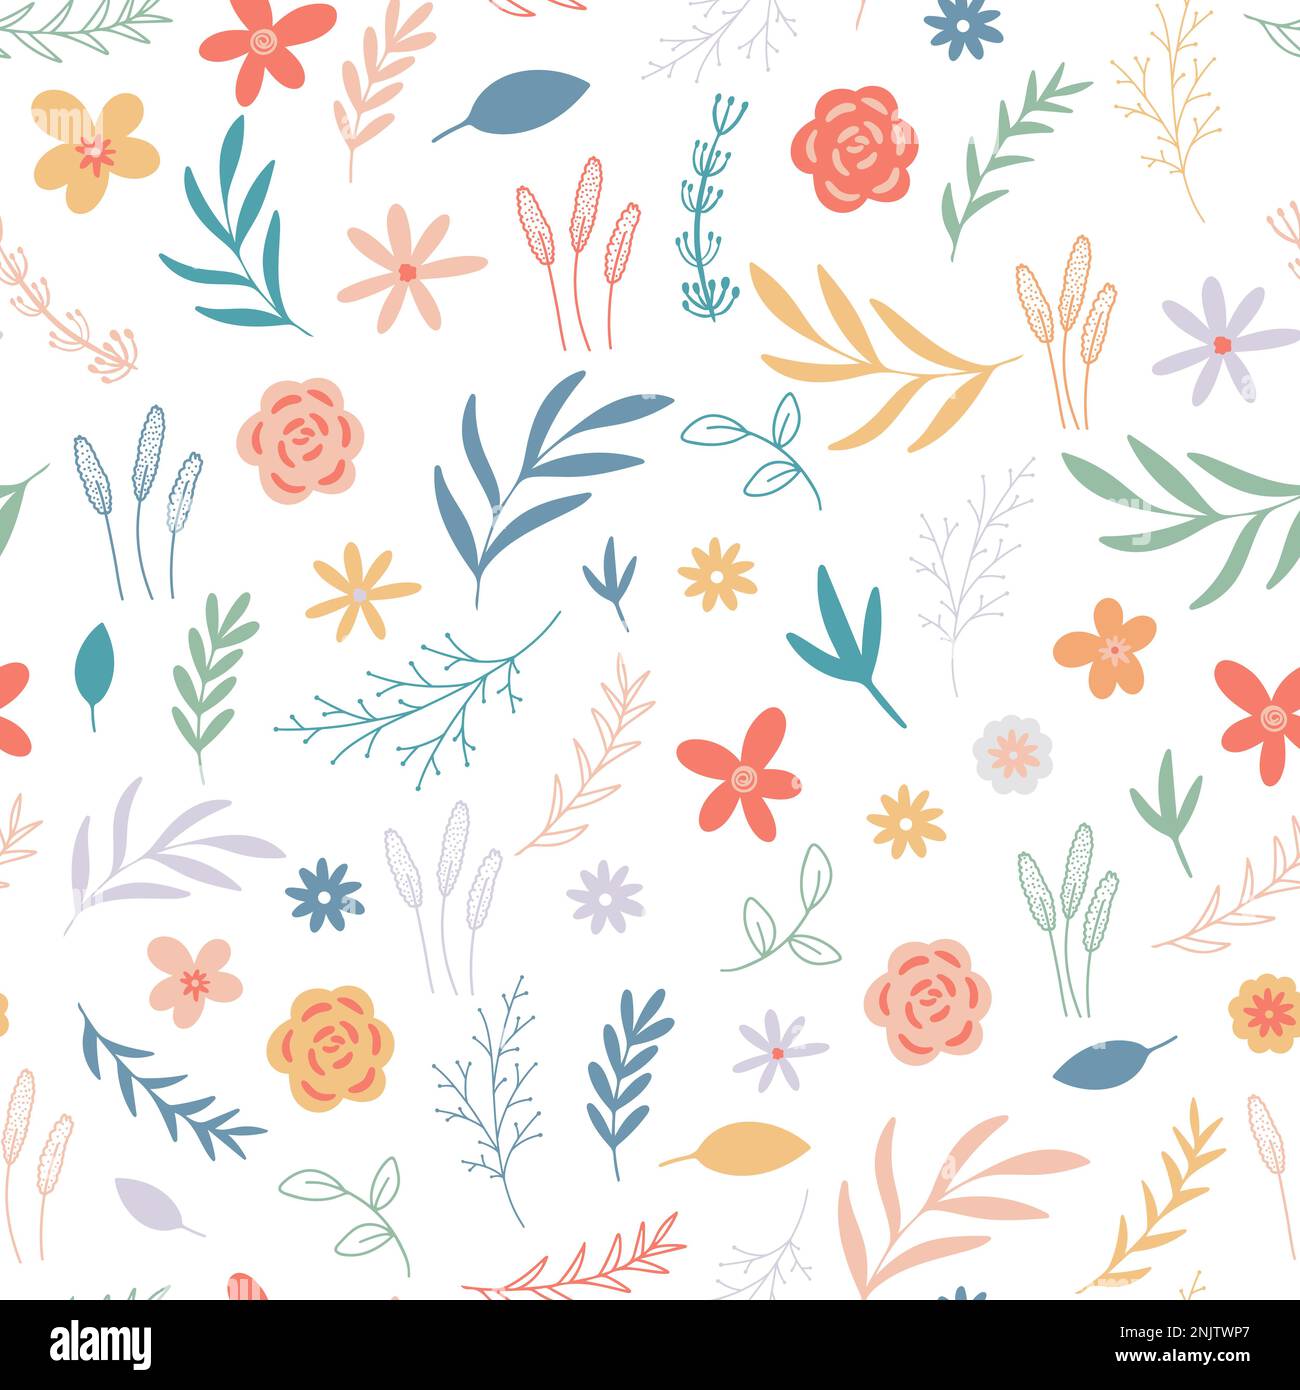 Gentle Cozy Seamless Pattern With Autumn Berries And Foliage